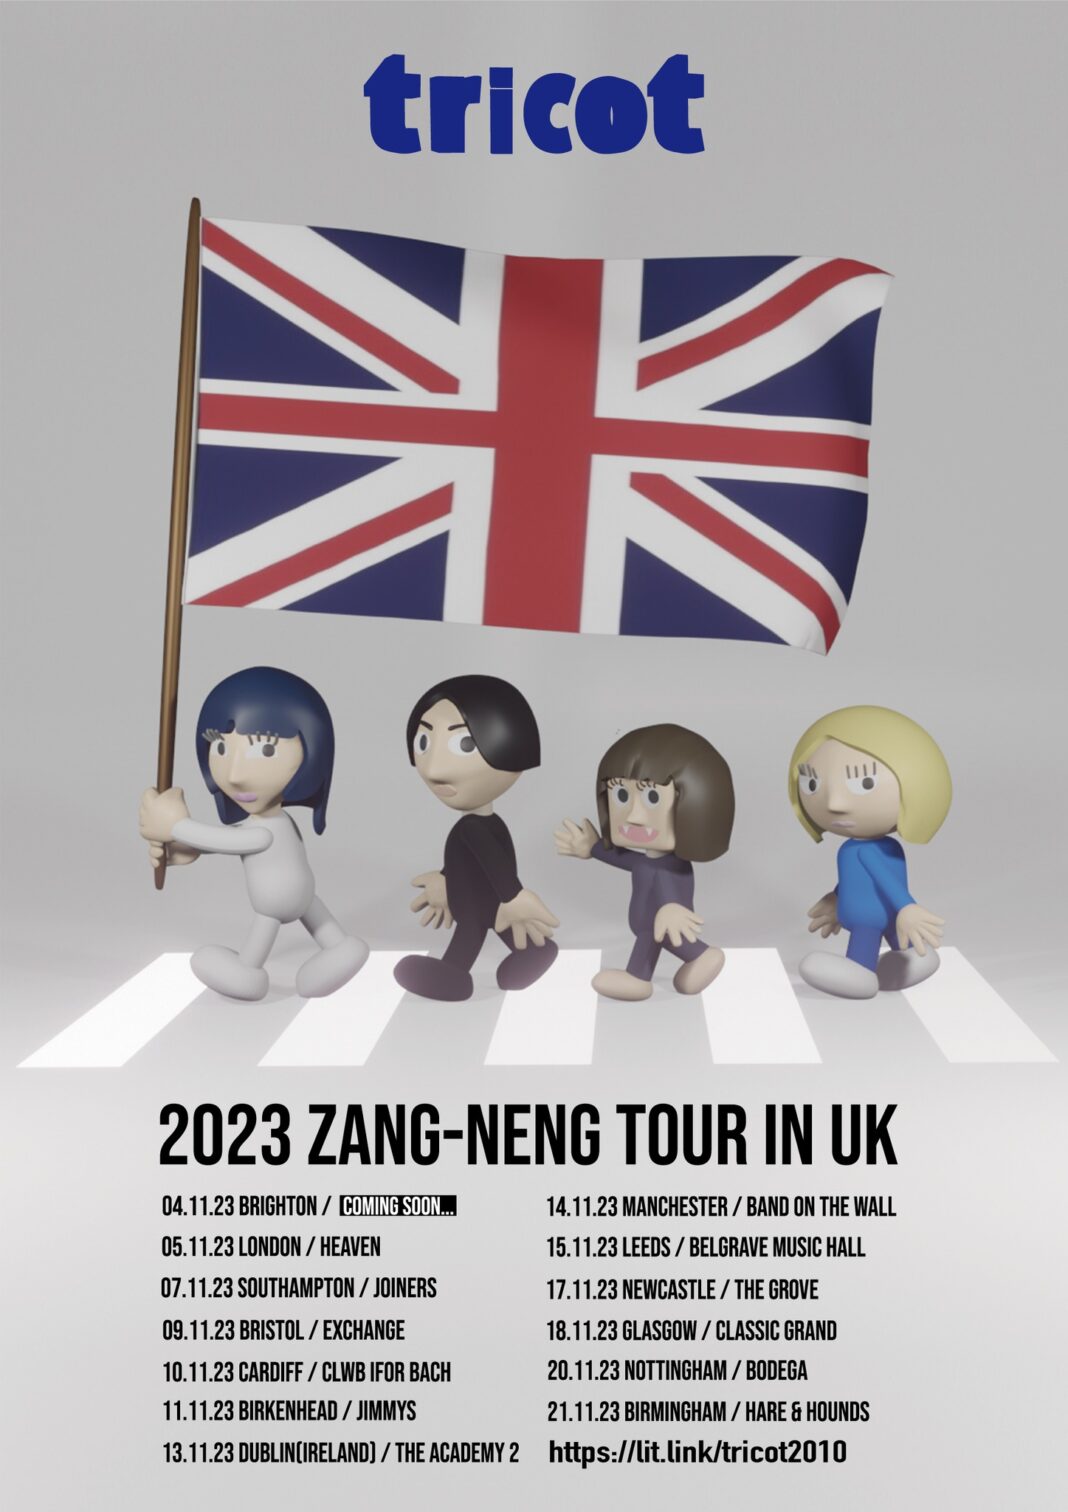 Japanese Rock Band Tricot is returning to UK in November 2023, shares schedule